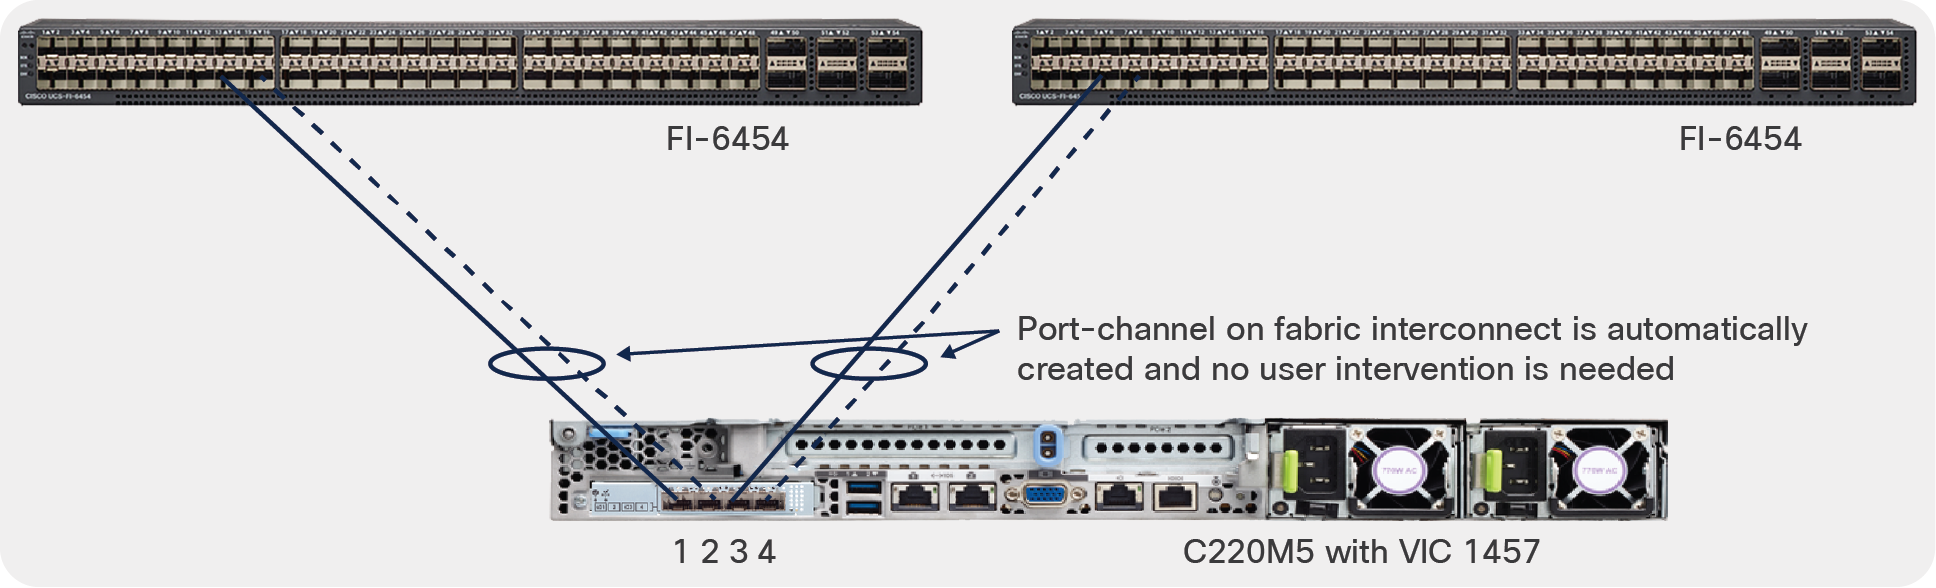 UCSM mode ports (1, 2) connect to one FI and ports (3, 4) to the other FI